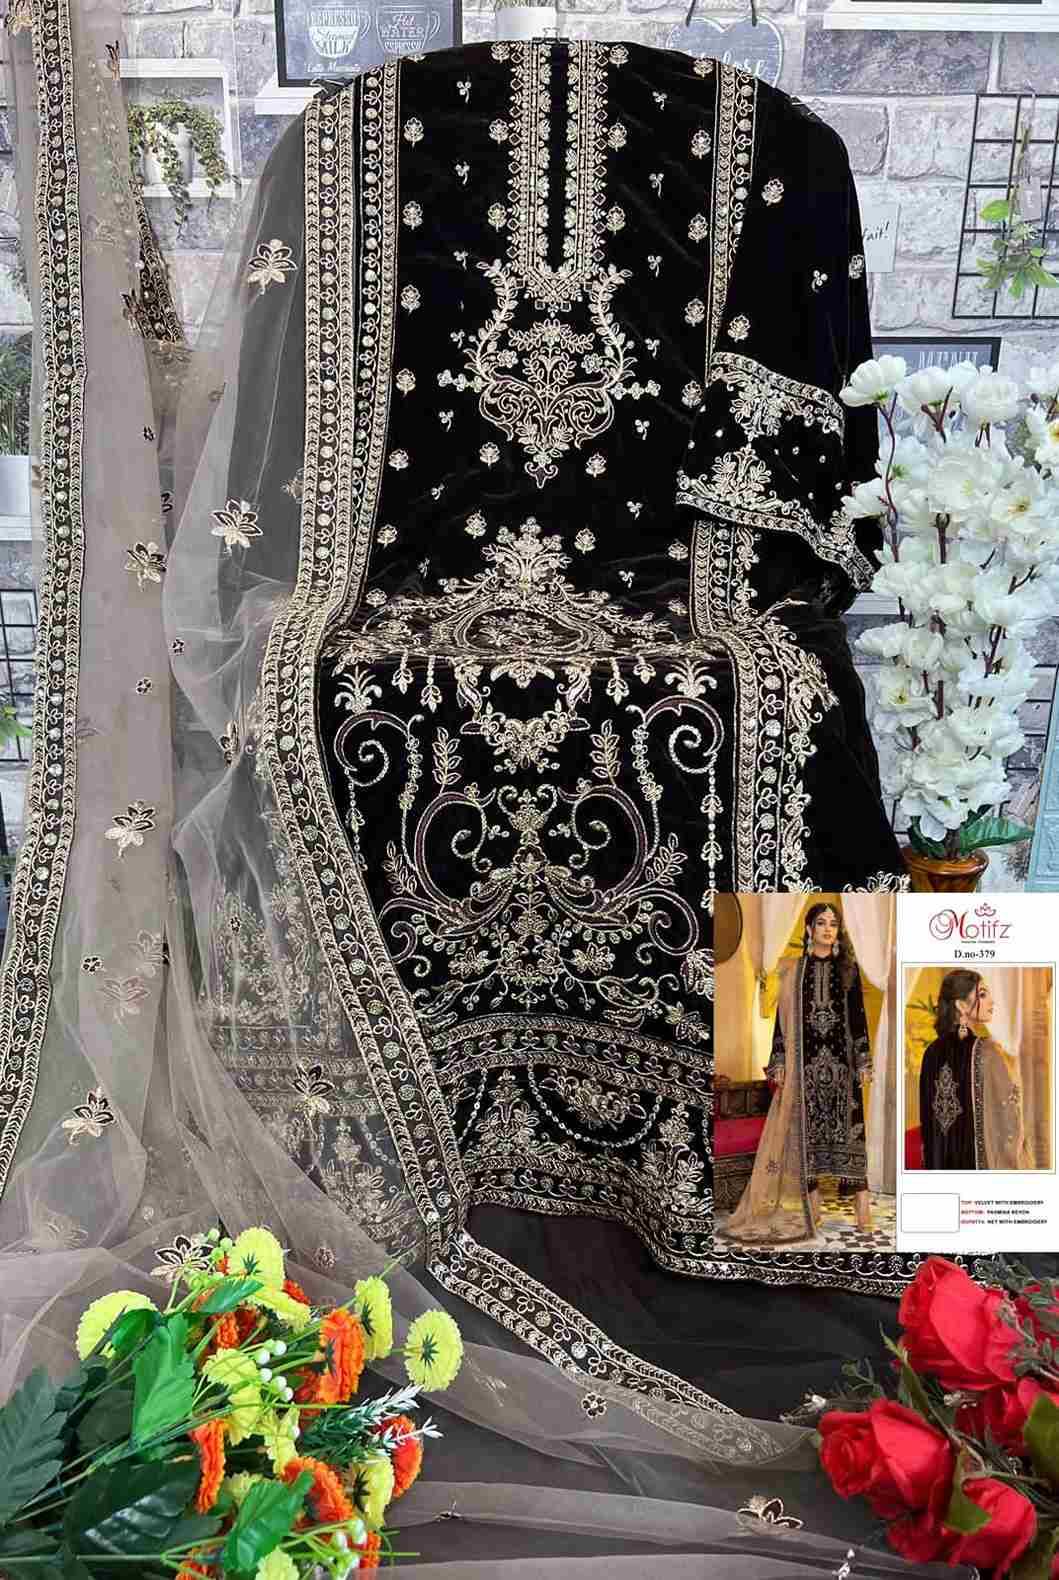 Motifz Hit Design 379 By Motifz Beautiful Pakistani Suits Colorful Stylish Fancy Casual Wear & Ethnic Wear Velvet Embroidery Dresses At Wholesale Price